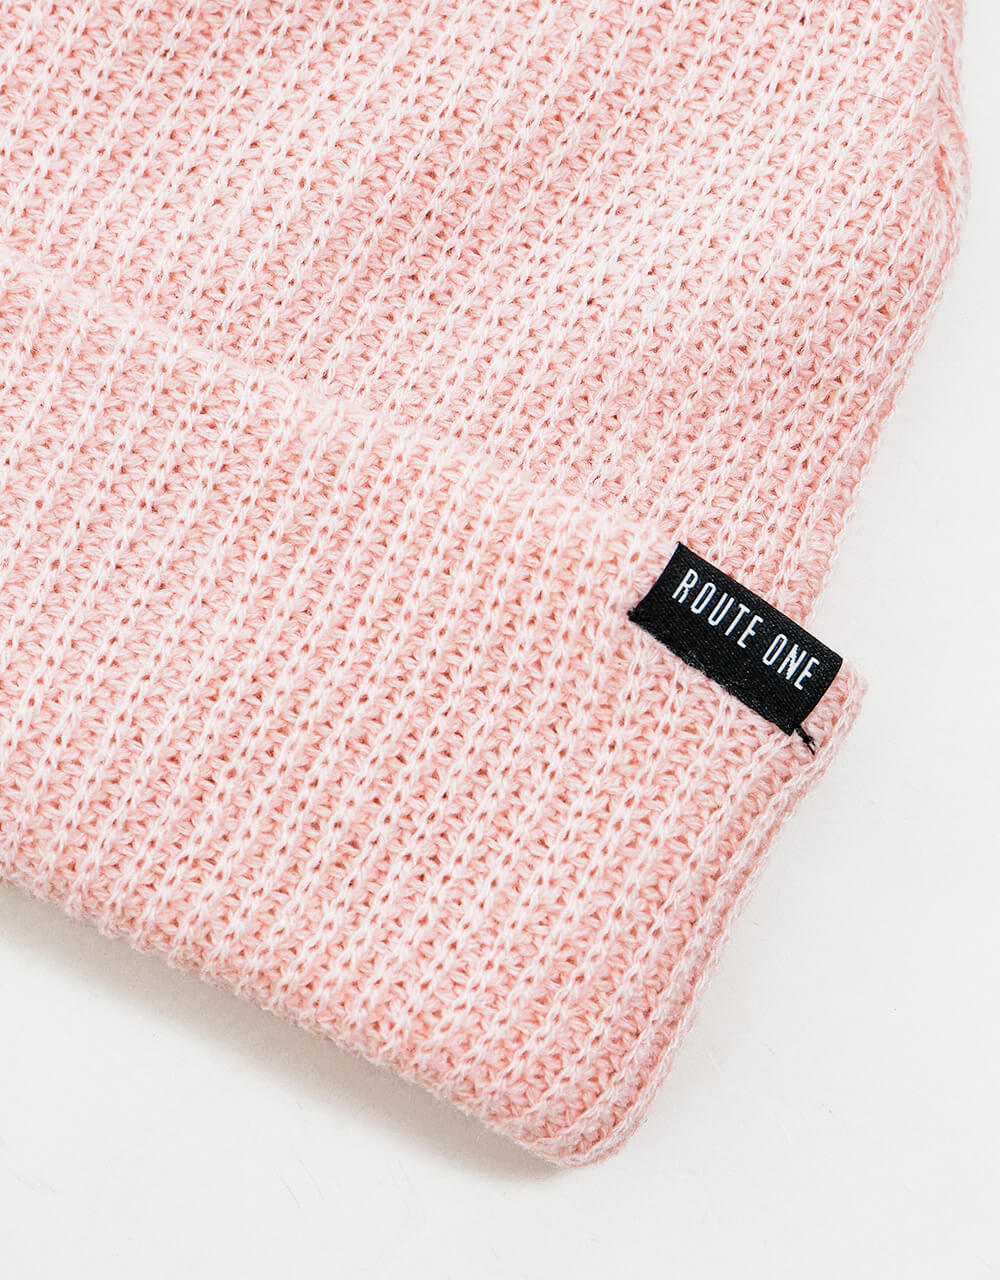 Route One Recycled Fisherman Beanie - Light Pink